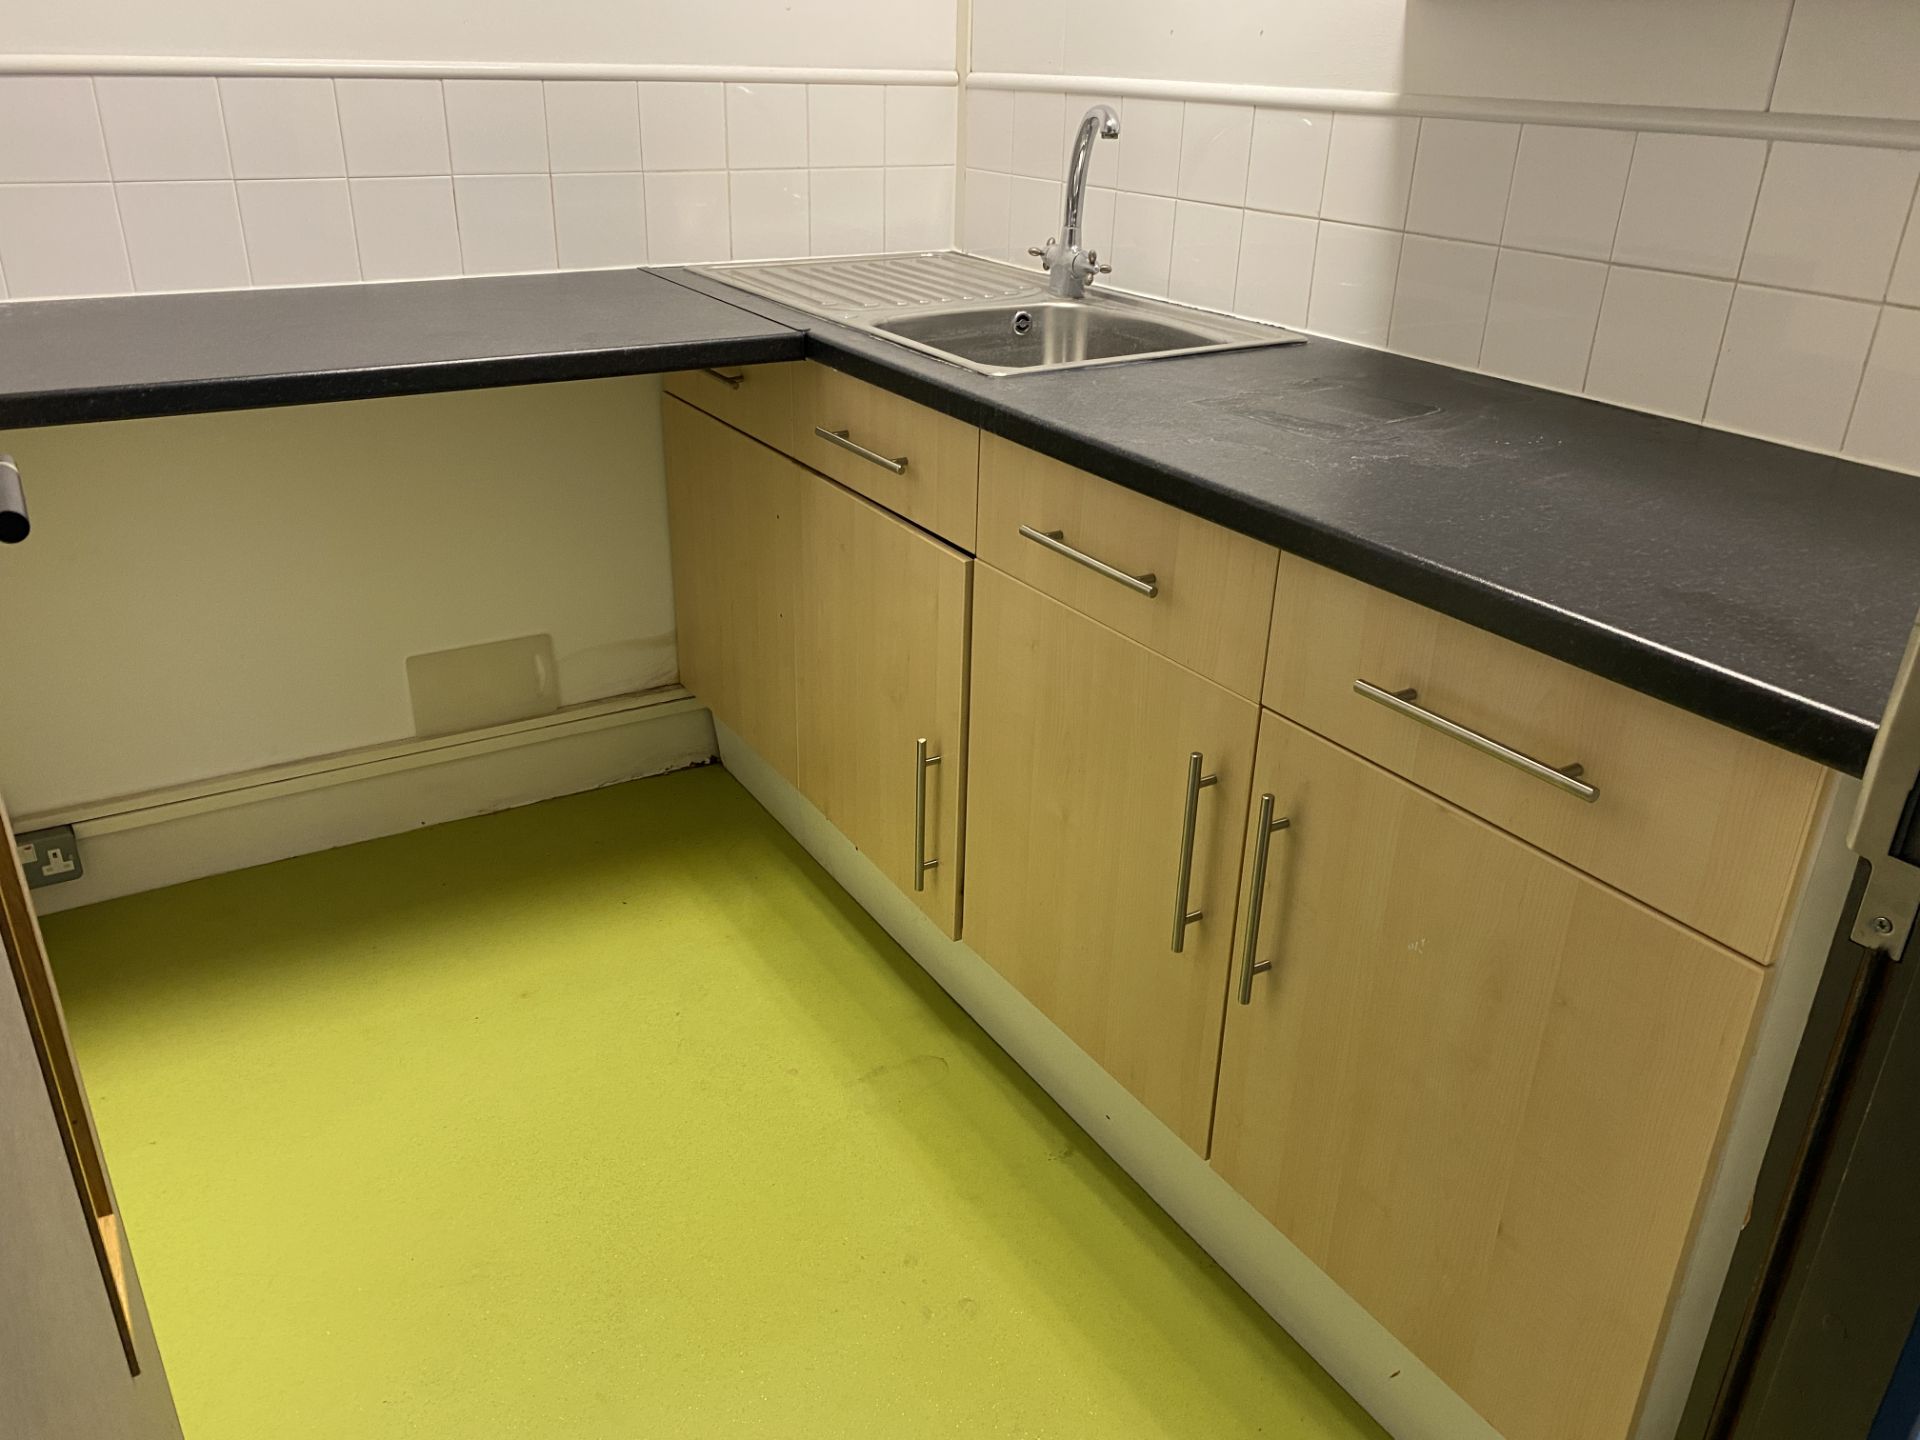 Small Kitchen area with cupboards, sink and tap.